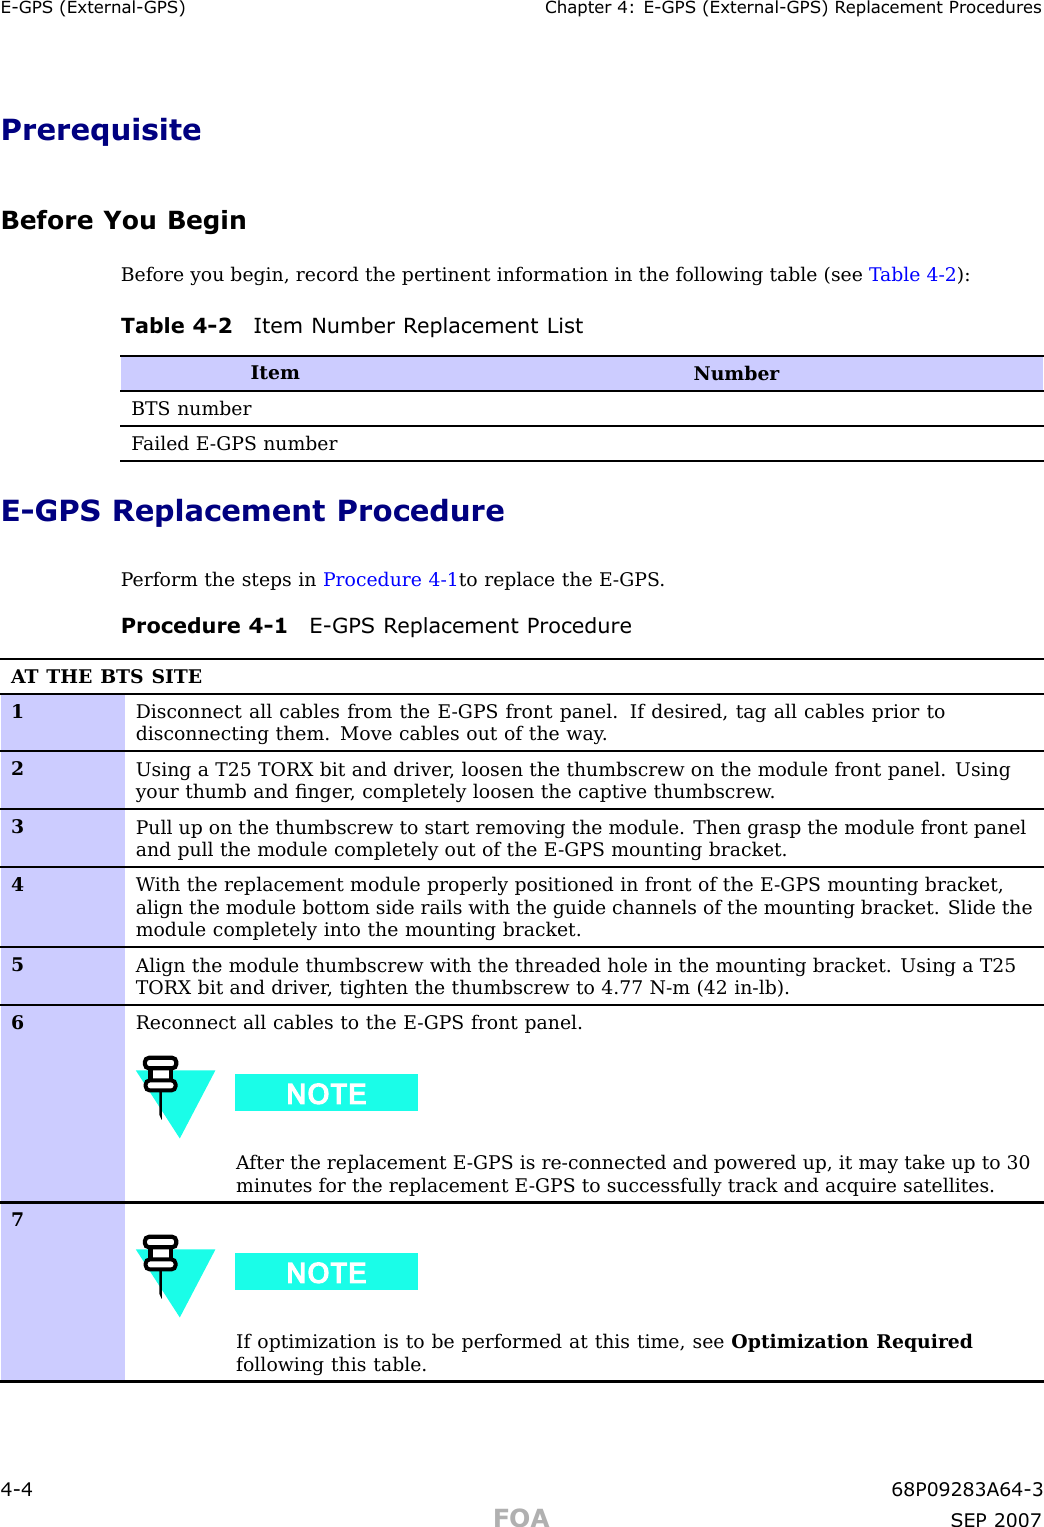 E -GPS (External -GPS) Chapter 4: E -GPS (External -GPS) R eplacement ProceduresPrerequisiteBefore You BeginBefore you begin, record the pertinent information in the following table (see T able 4 -2 ):Table 4 -2 Item Number R eplacement ListItemNumberBTS numberF ailed E -GPS numberE -GPS Replacement ProcedureP erform the steps in Procedure 4 -1 to replace the E -GPS .Procedure 4 -1 E -GPS R eplacement ProcedureA T THE BTS SITE1Disconnect all cables from the E -GPS front panel. If desired, tag all cables prior todisconnecting them. Move cables out of the way .2Using a T25 TORX bit and driver , loosen the thumbscrew on the module front panel. Usingyour thumb and ﬁnger , completely loosen the captive thumbscrew .3Pull up on the thumbscrew to start removing the module. Then grasp the module front paneland pull the module completely out of the E -GPS mounting bracket.4W ith the replacement module properly positioned in front of the E -GPS mounting bracket,align the module bottom side rails with the guide channels of the mounting bracket. Slide themodule completely into the mounting bracket.5Align the module thumbscrew with the threaded hole in the mounting bracket. Using a T25TORX bit and driver , tighten the thumbscrew to 4.77 N-m (42 in-lb).6Reconnect all cables to the E -GPS front panel.A fter the replacement E -GPS is re-connected and powered up, it may take up to 30minutes for the replacement E -GPS to successfully track and acquire satellites.7If optimization is to be performed at this time, see Optimization Requiredfollowing this table.4 -4 68P09283A64 -3FOA SEP 2007